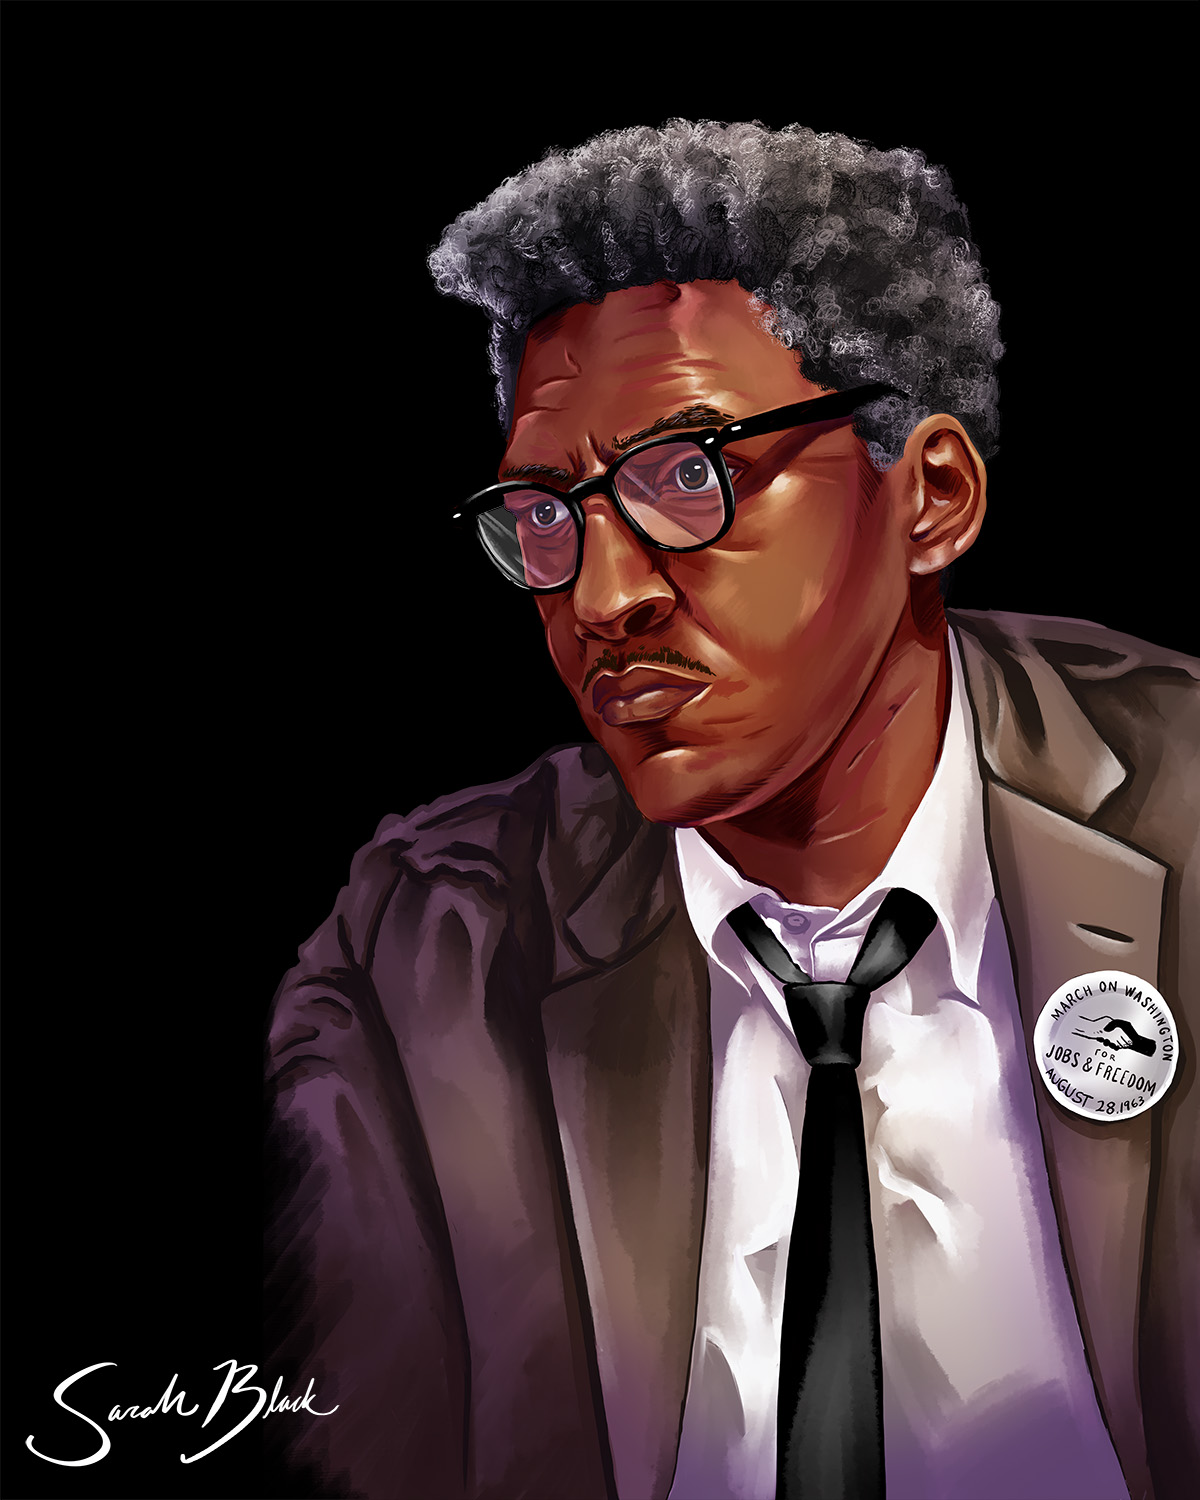 An original digitally painted portrait of Civil Rights & LGBTQIA+ icon Bayard Rustin, with line work by Heather Lawver & color rendering by Sarah Black, created for Deviant Events.